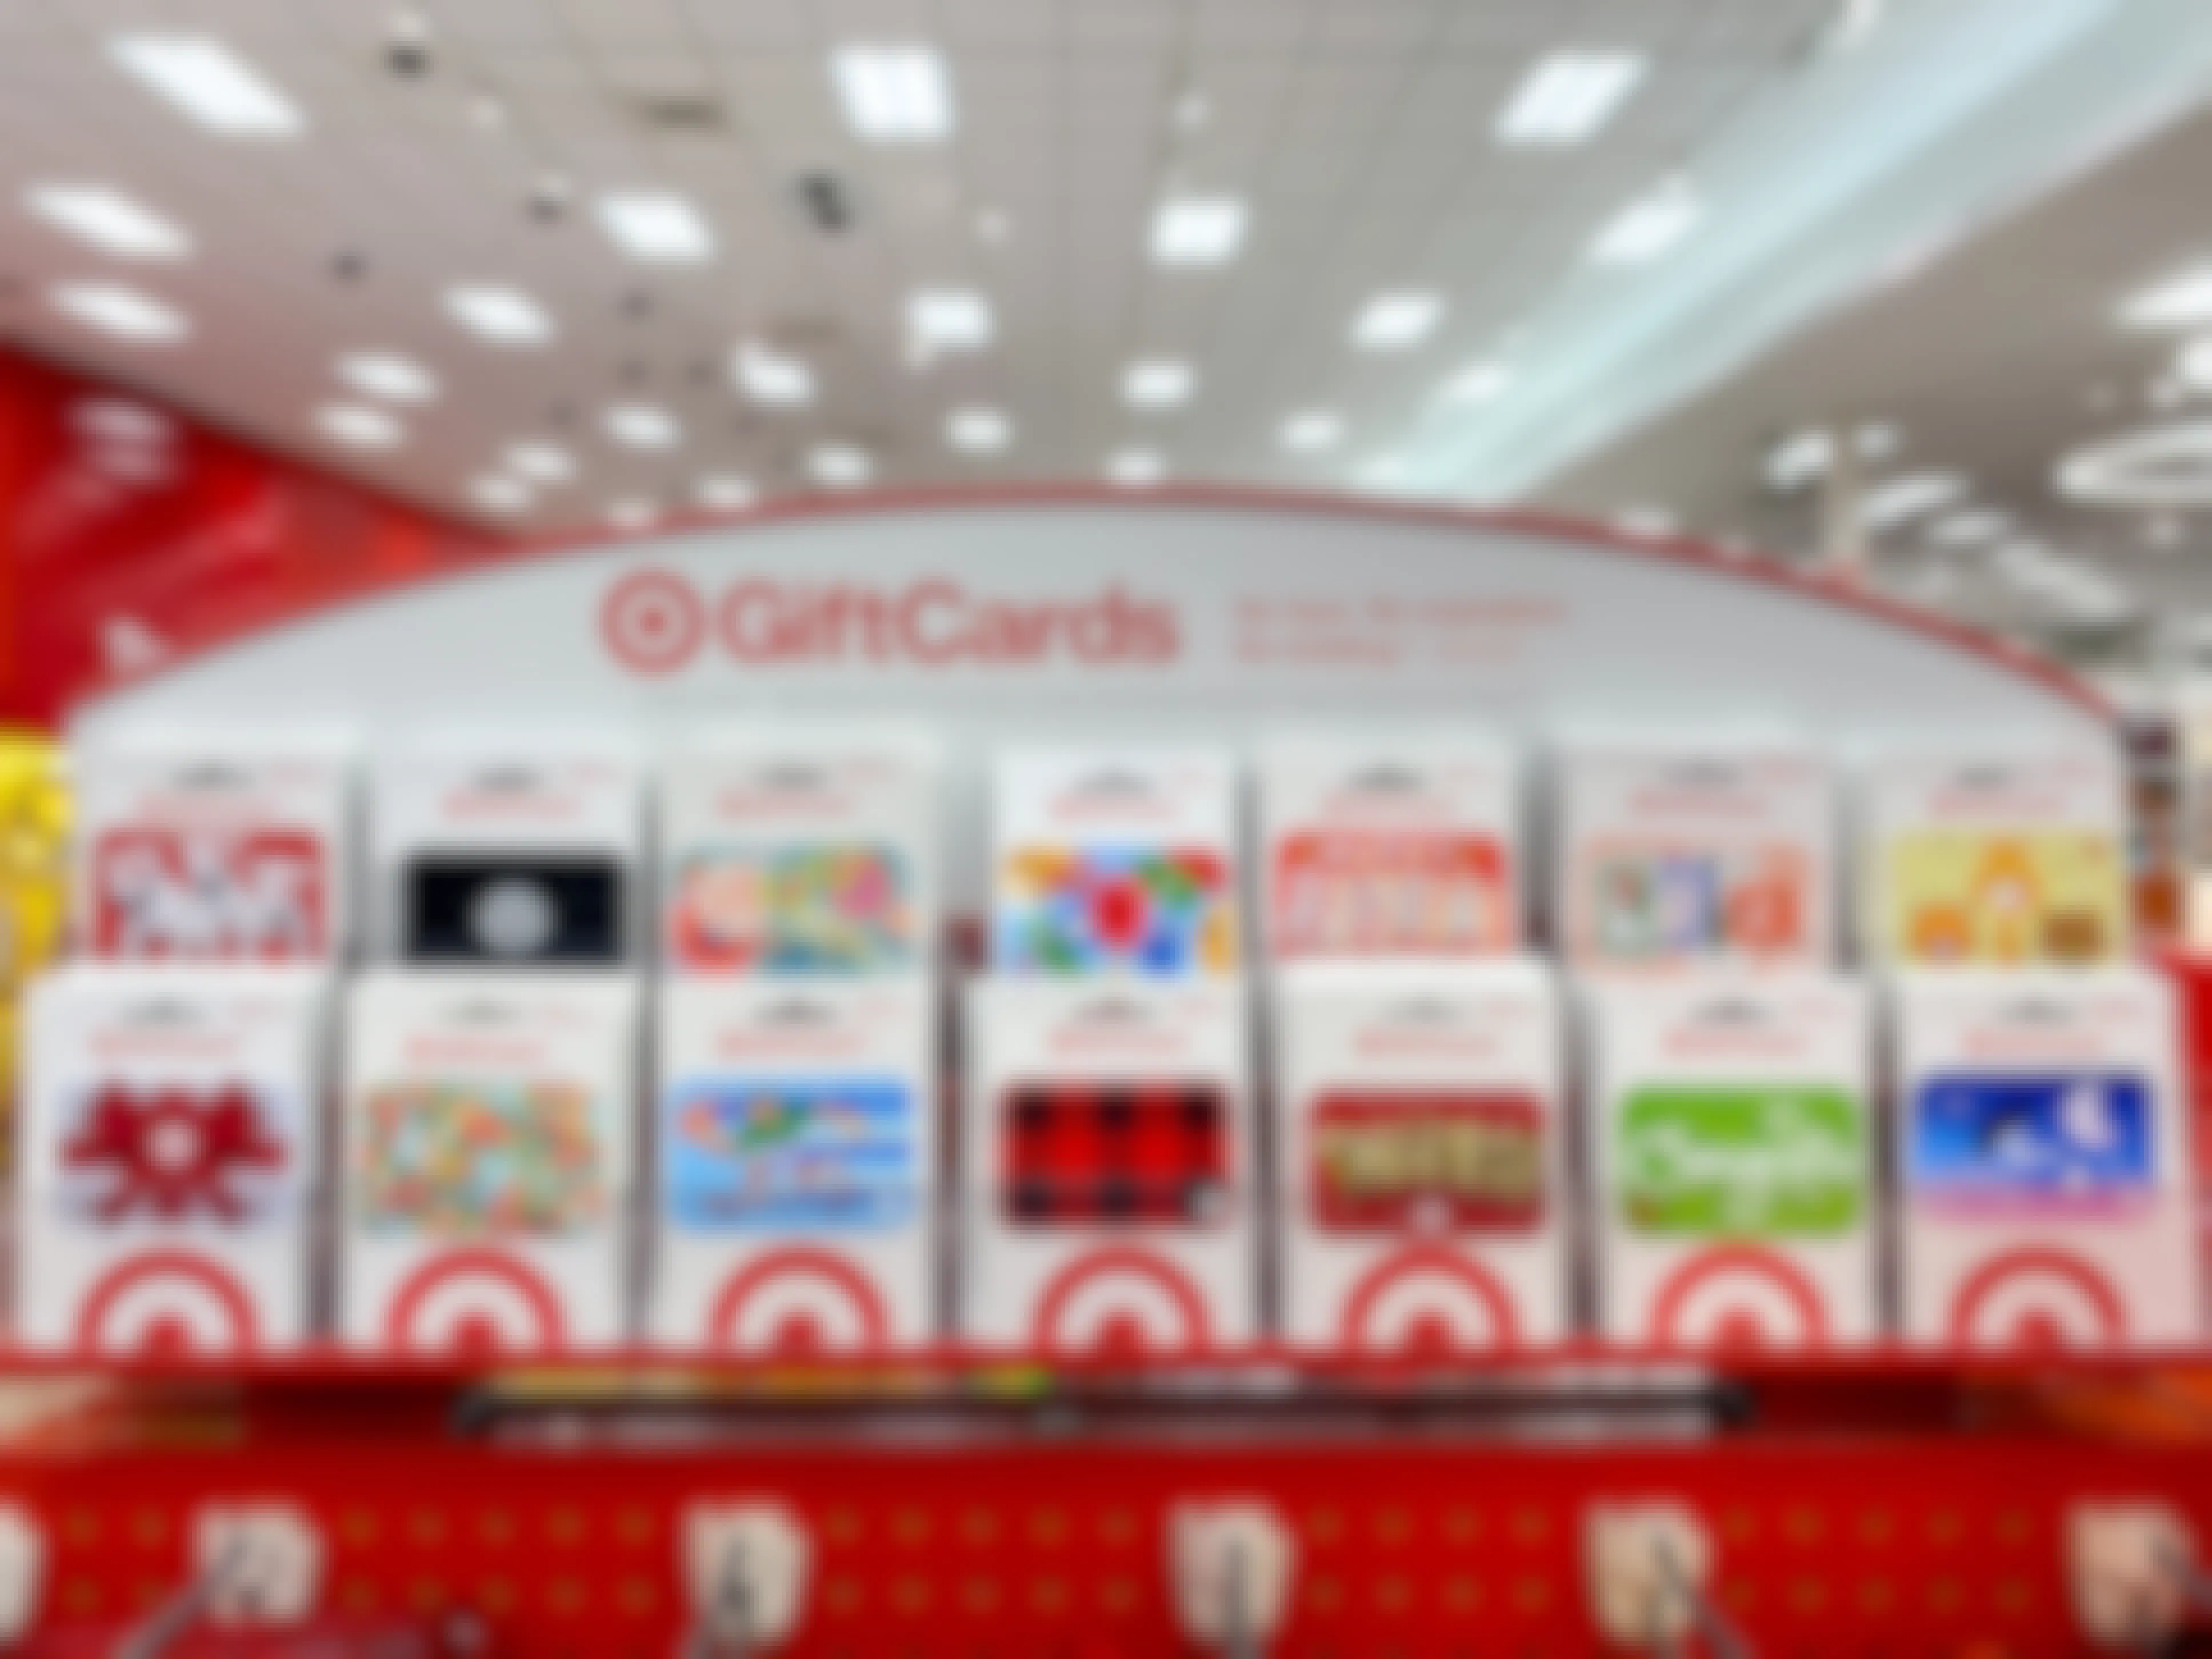 target gift cards on display at store checkout